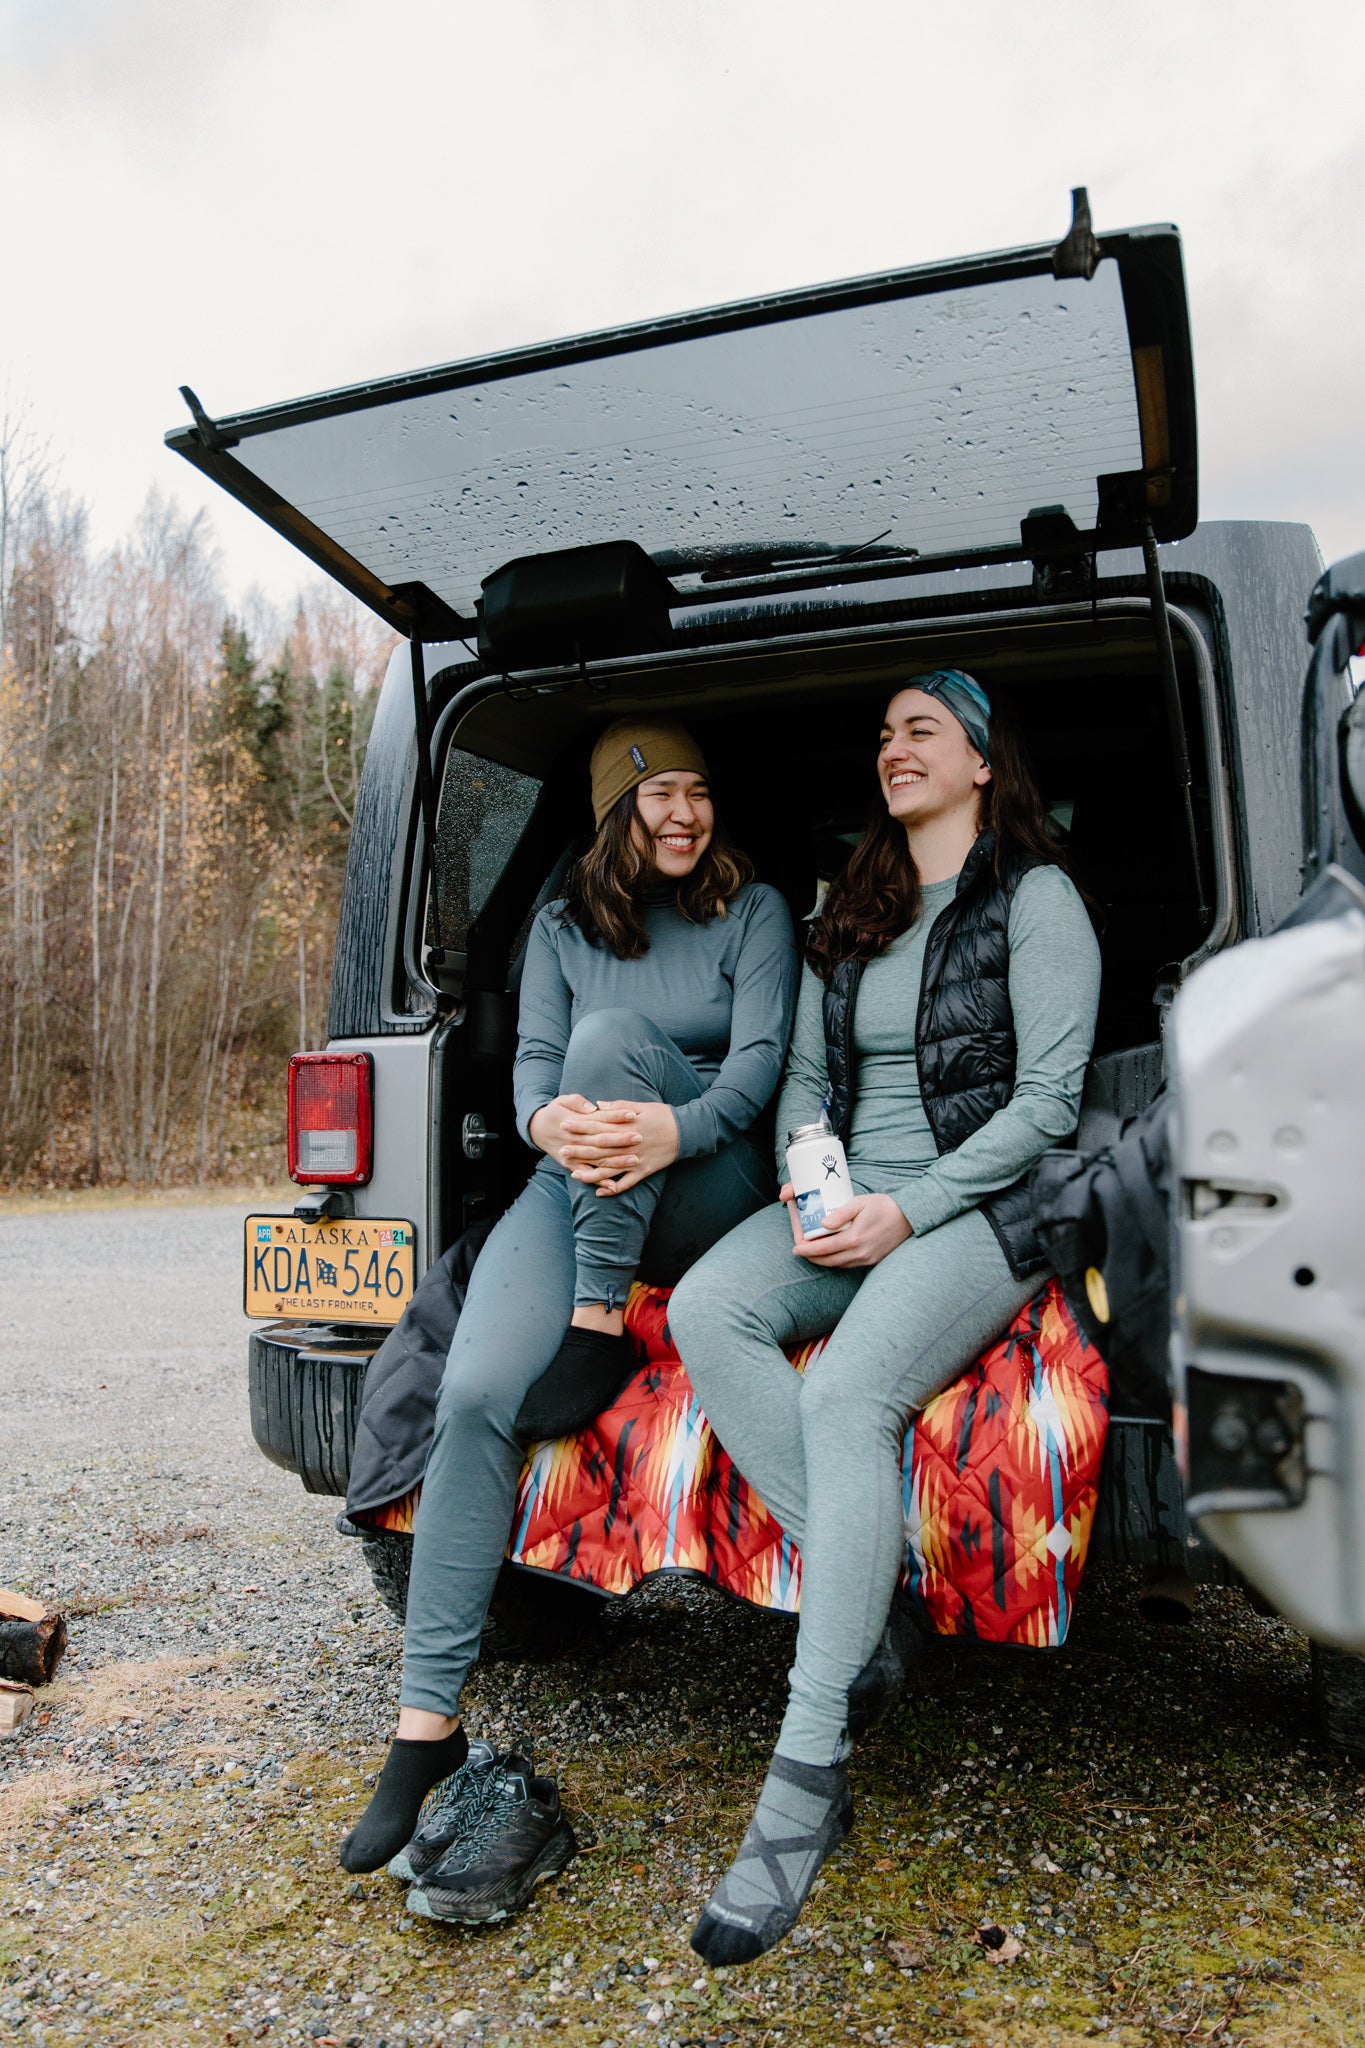 alpine fit base layers on models in truck outside